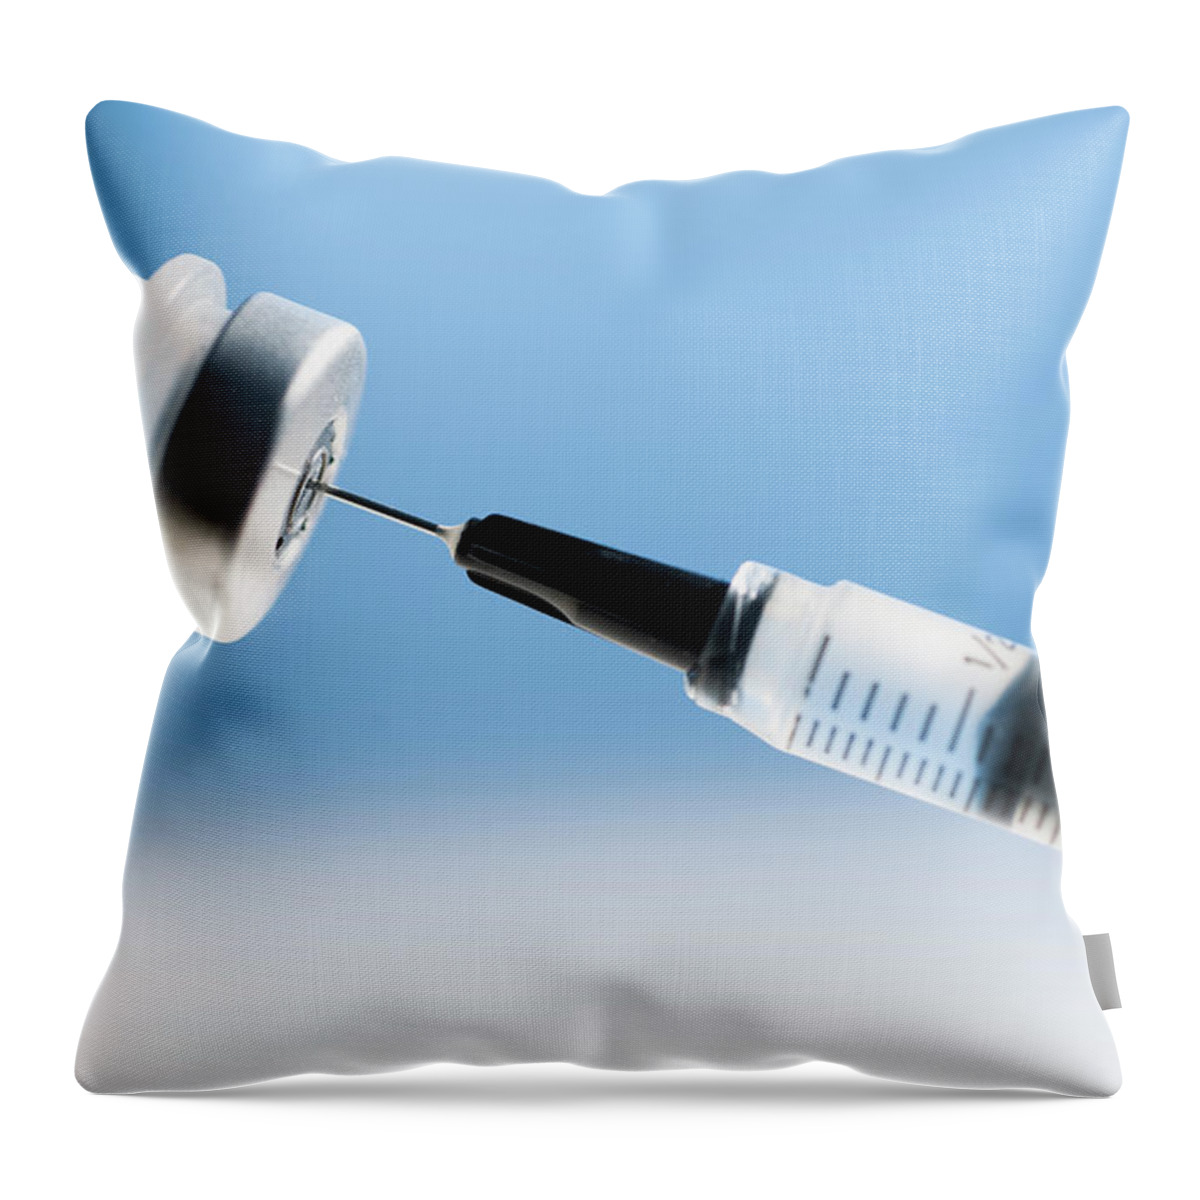 Two Objects Throw Pillow featuring the photograph Studio Shot Of Syringe And Vial by Tetra Images